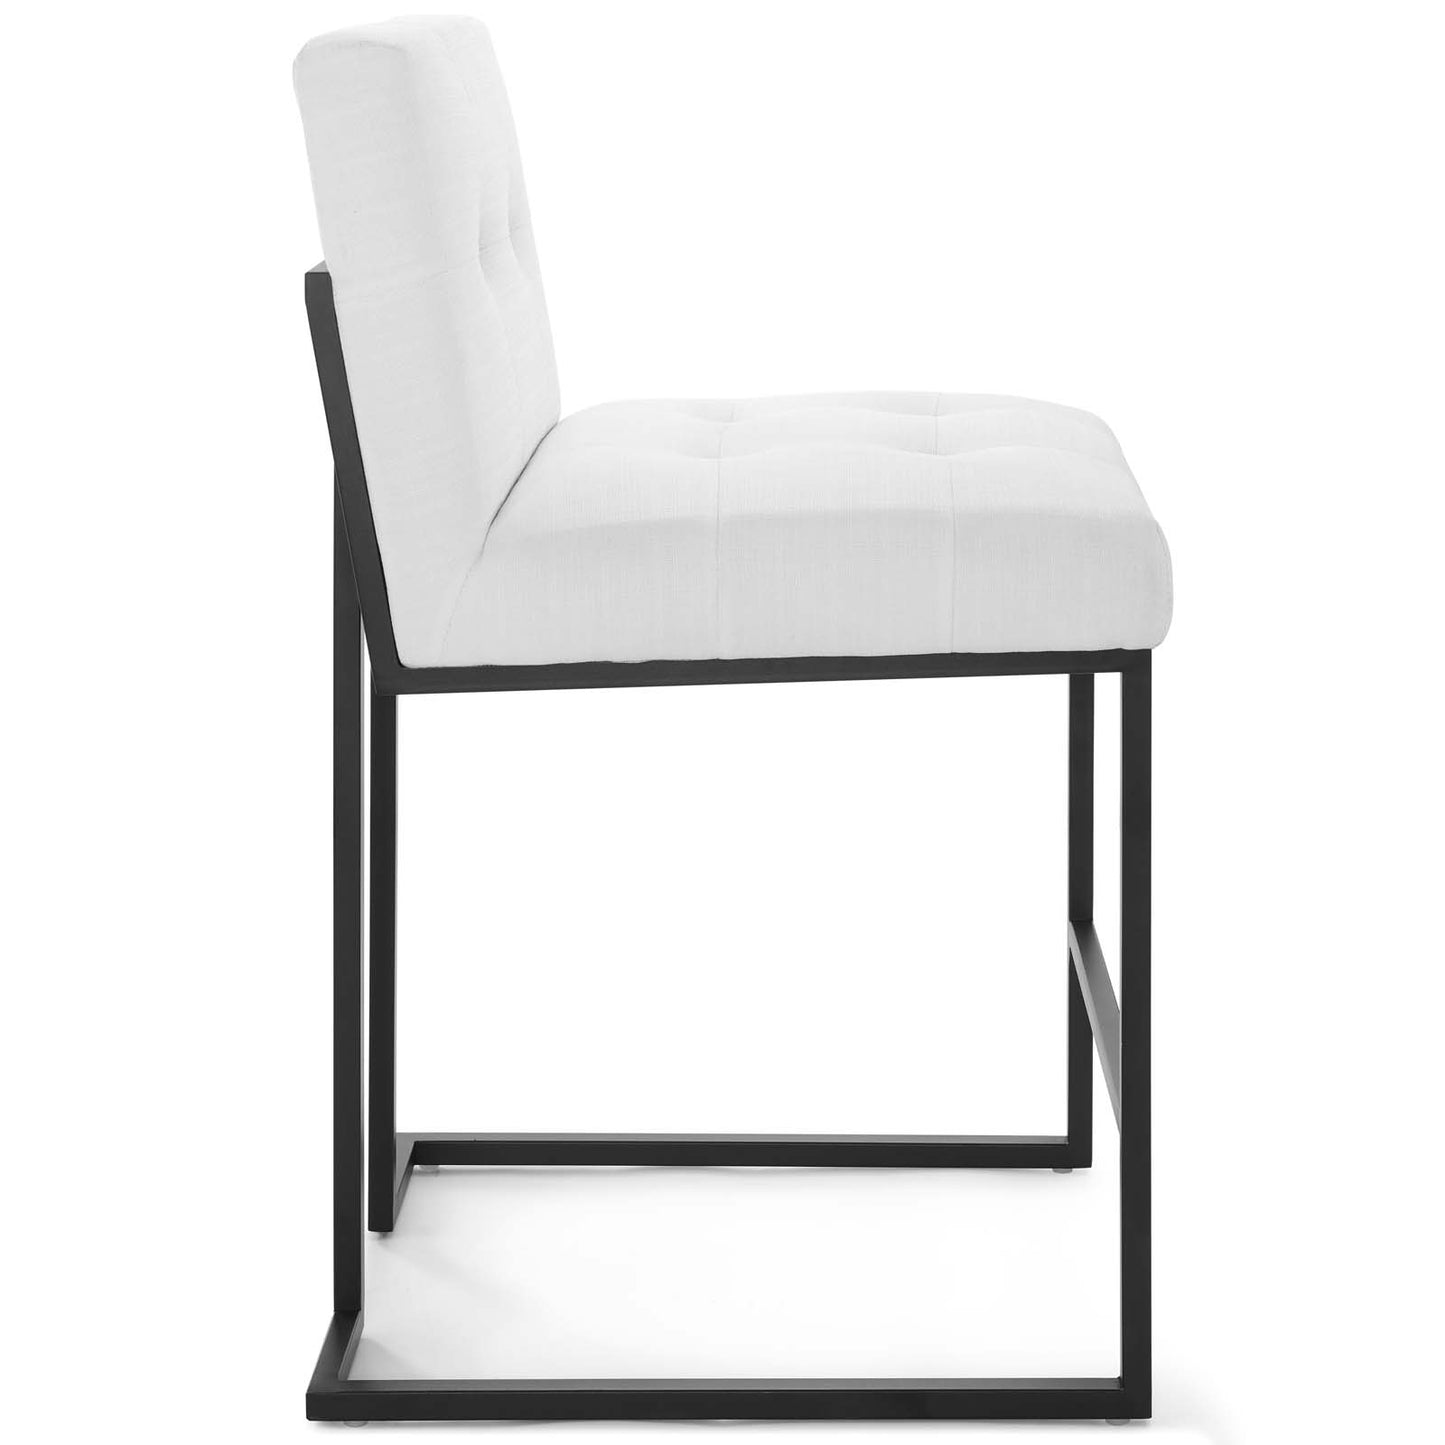 Privy Black Stainless Steel Upholstered Fabric Counter Stool Black White EEI-3854-BLK-WHI